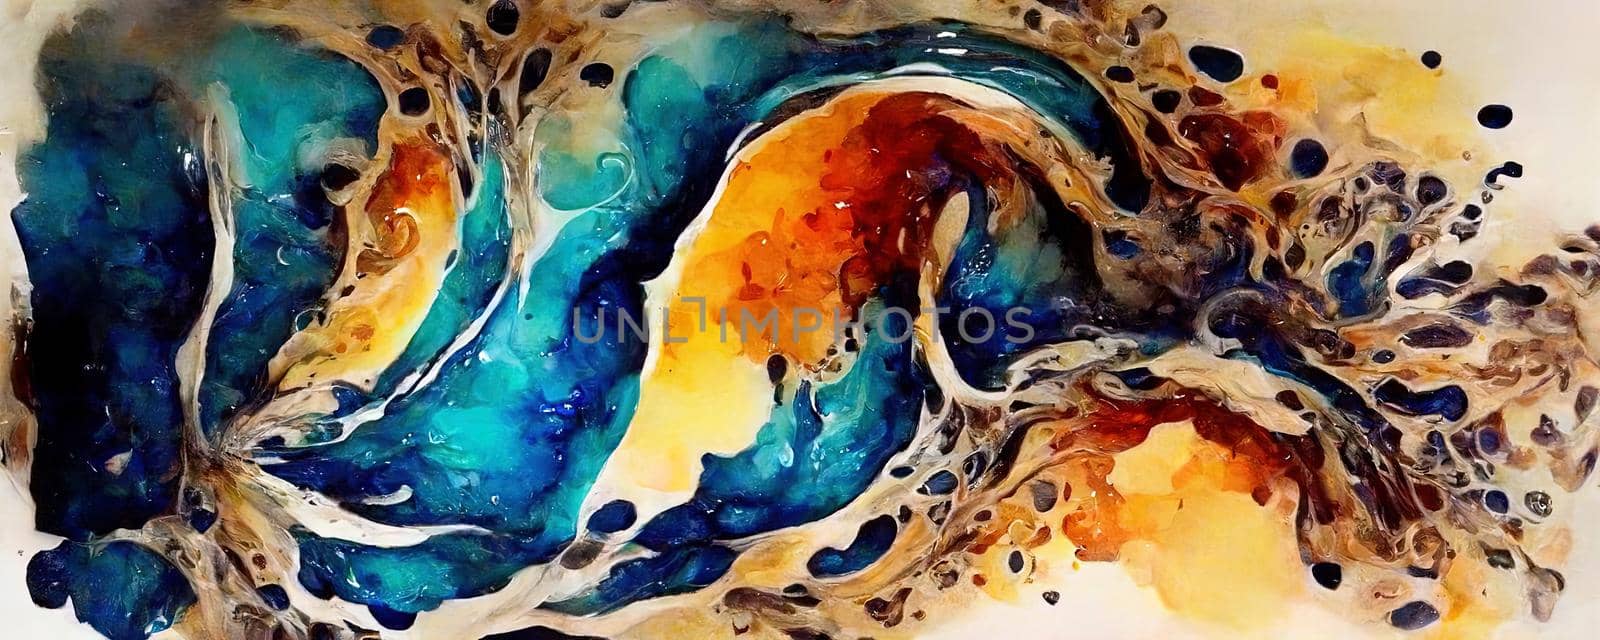 abstract multicolored illustration made in the style of alcohol ink by TRMK